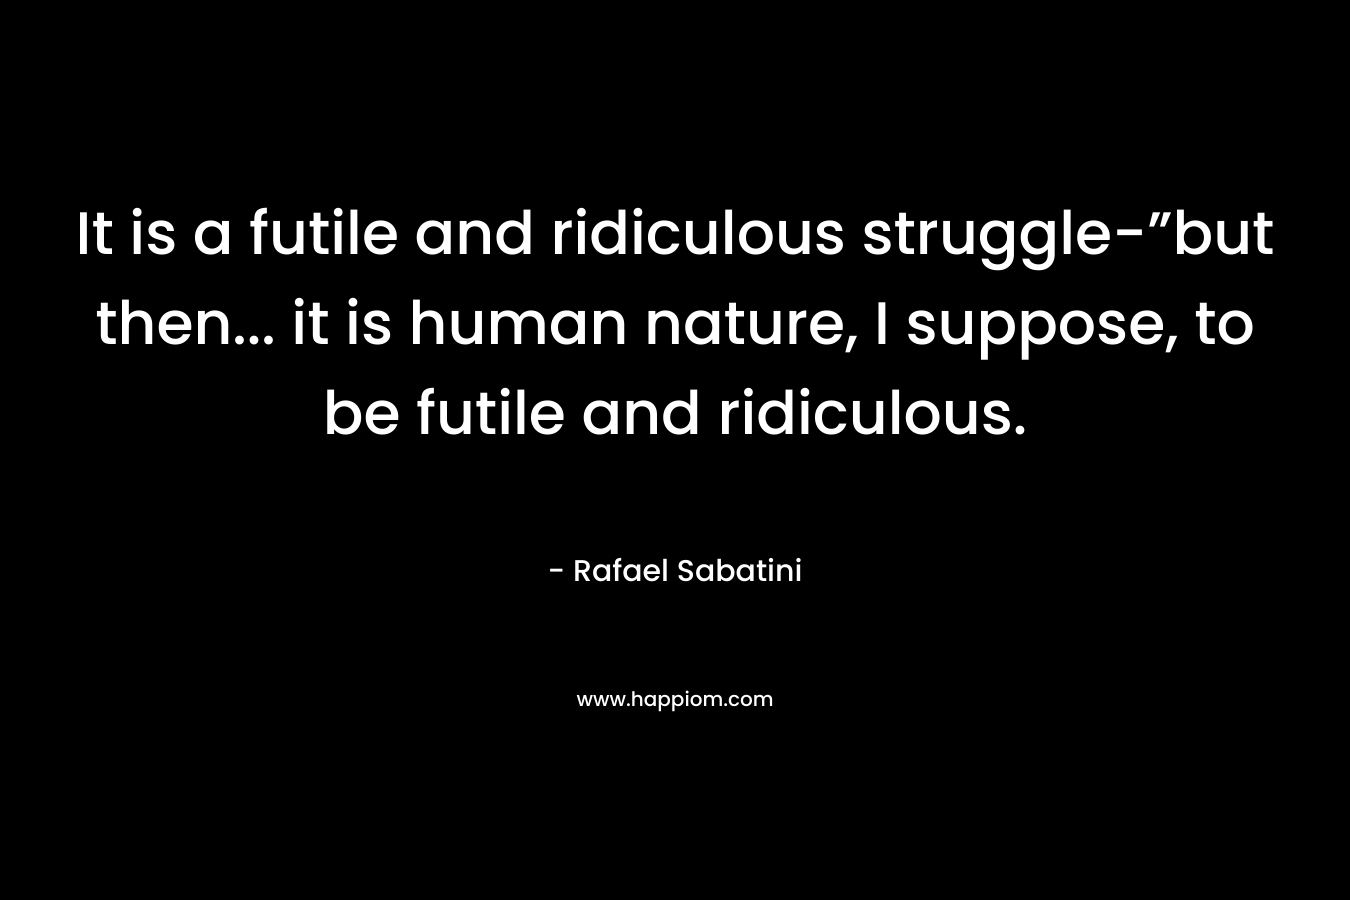 It is a futile and ridiculous struggle-”but then... it is human nature, I suppose, to be futile and ridiculous.